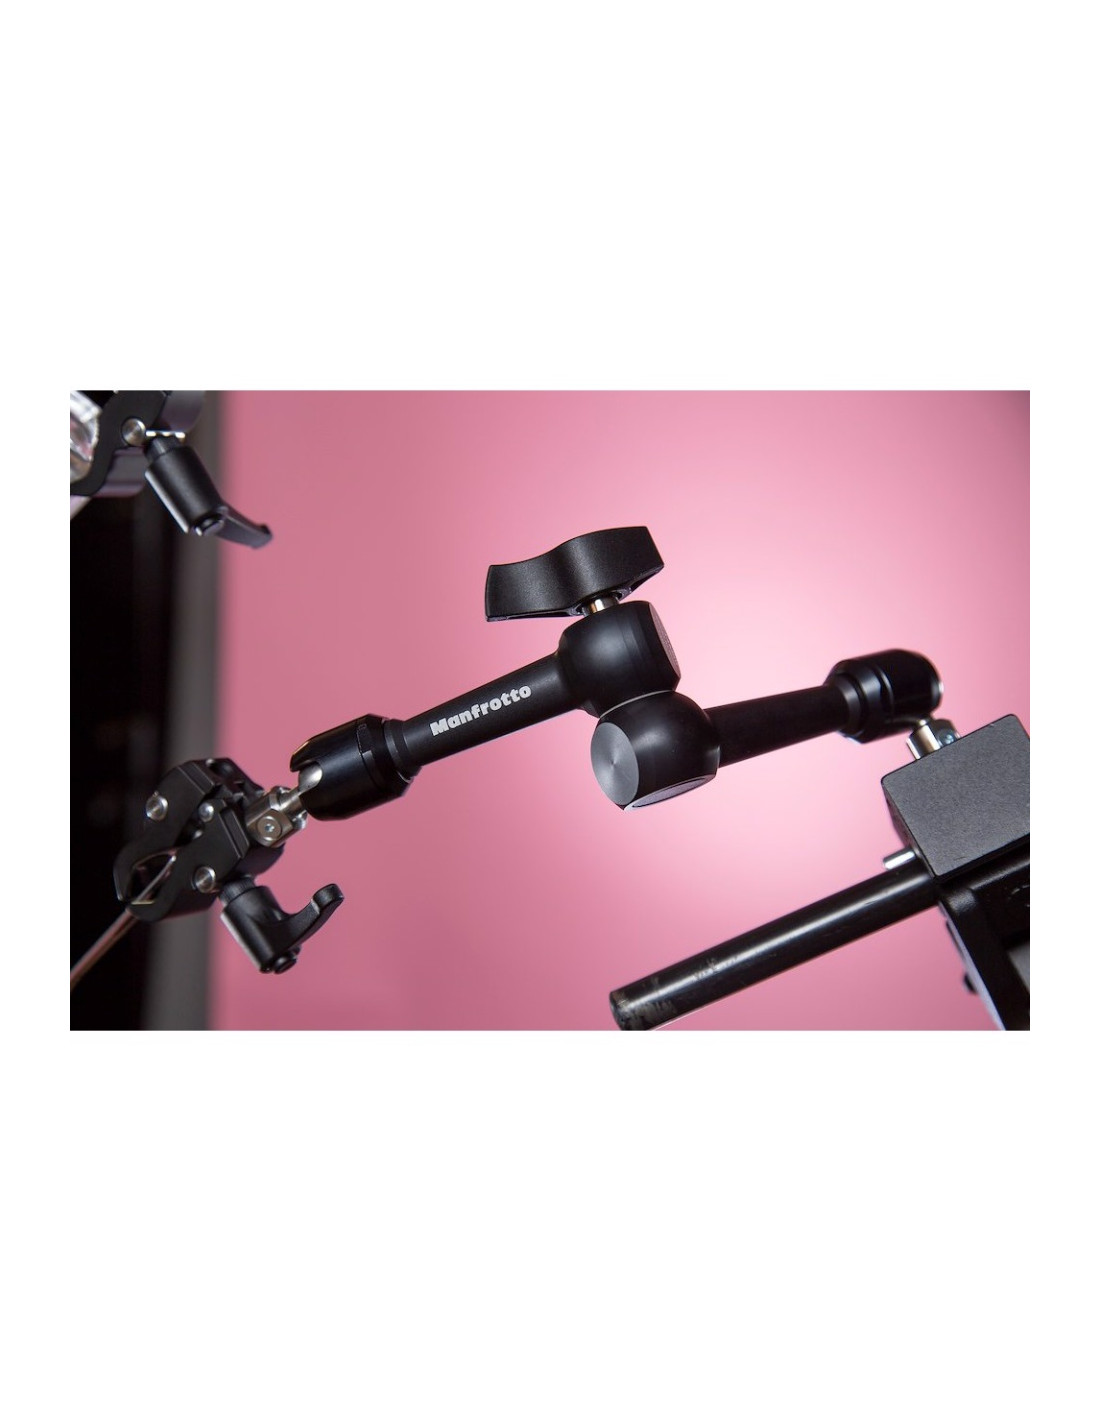 Micro Bras Fiction Variable - mANFROTTO 15 cm Charge 3 kg